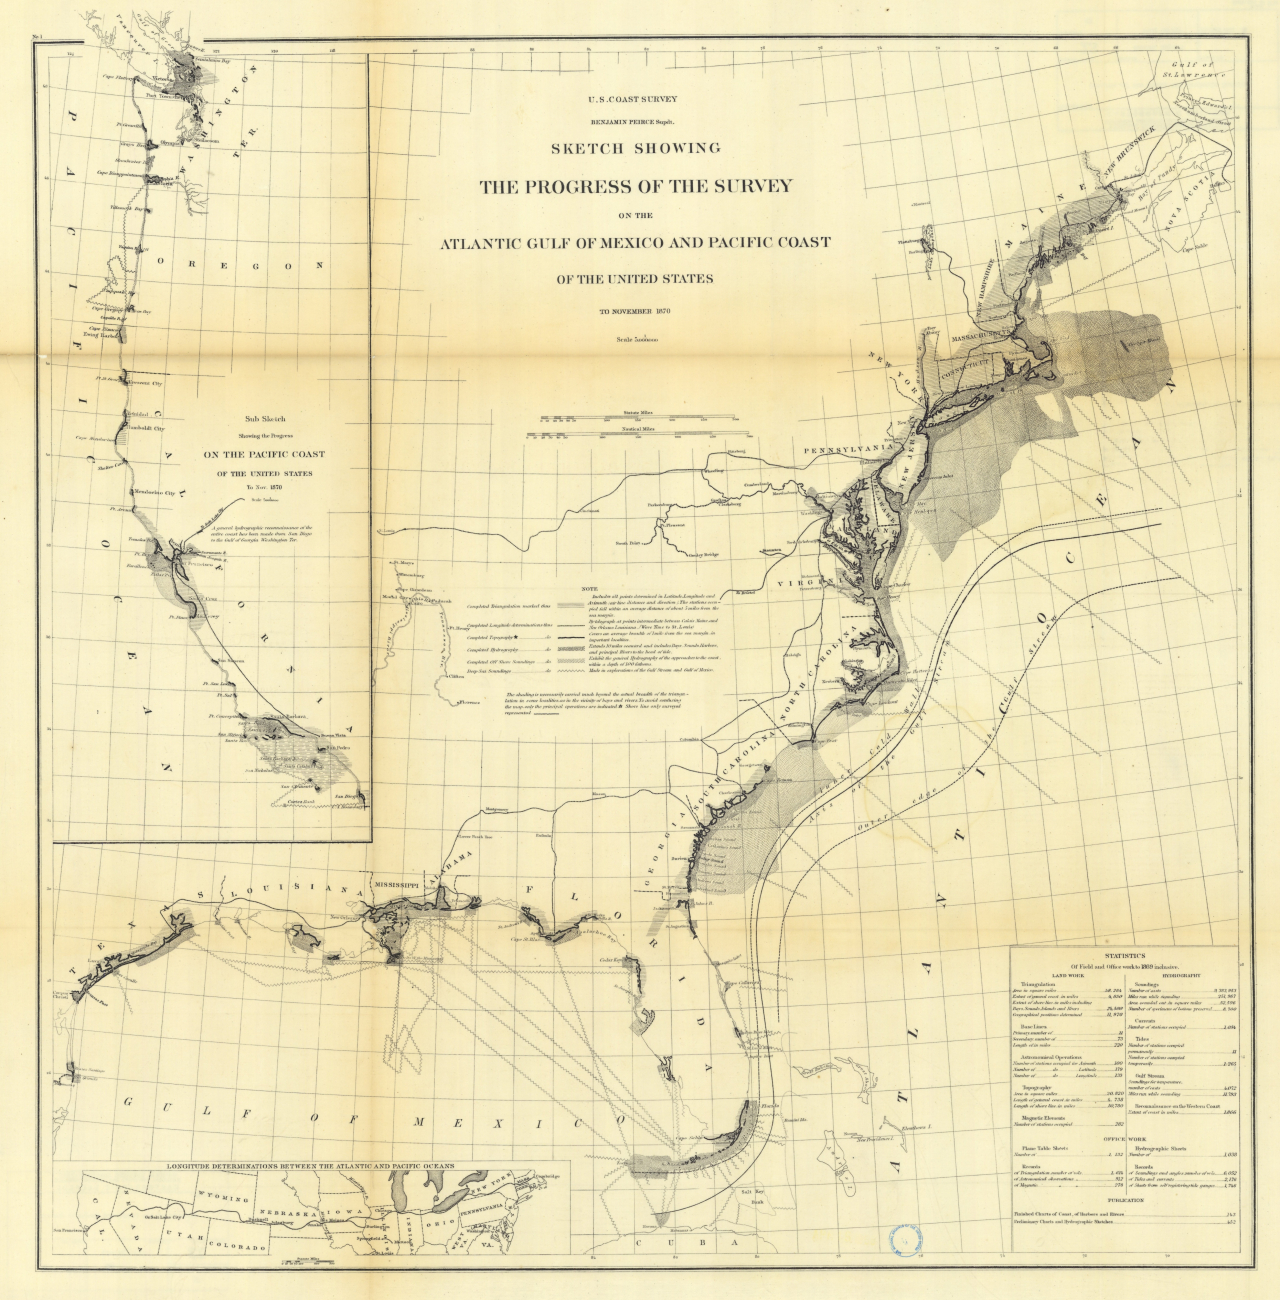 Sketch Showing the Progress of the Survey on the Atlantic Gulf of Mexico andPacific Coast of the United States to November 1870